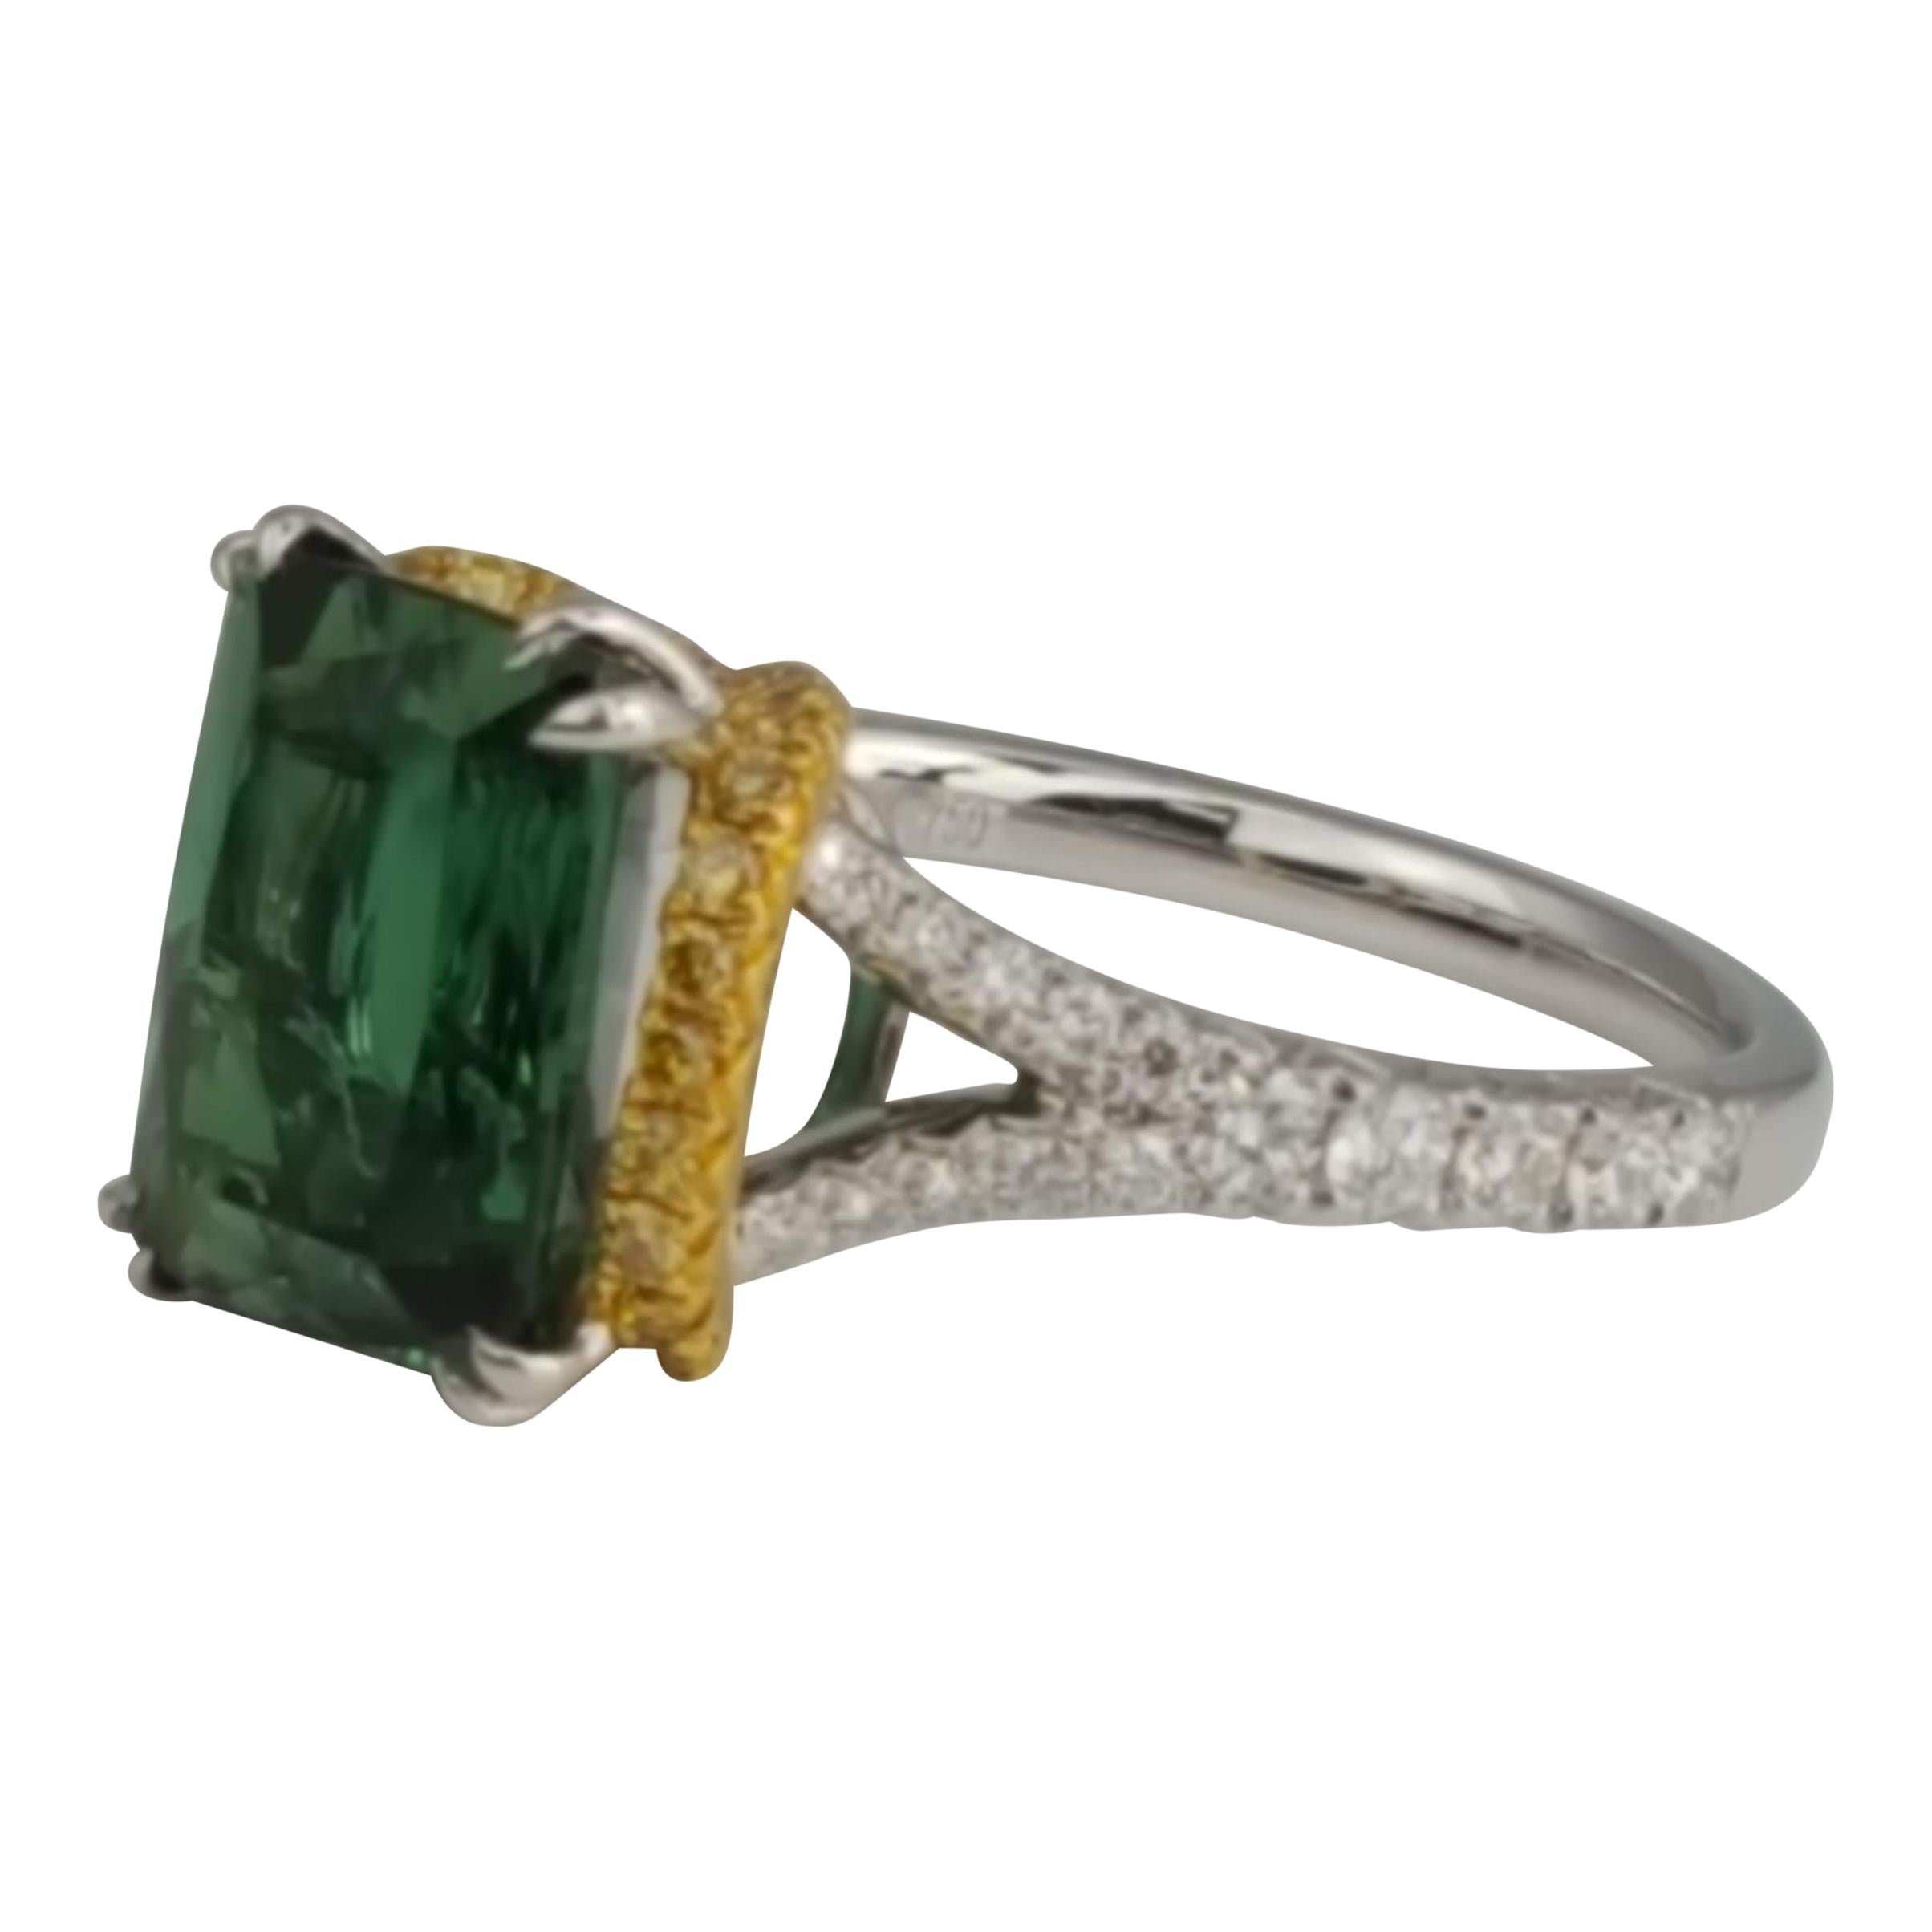 (DiamondTown) This beautiful ring carries a 4.6 carat emerald cut Green Tourmaline center, delicately enclosed by 0.21 carats round yellow diamonds. Additional diamonds trail down the shank, bringing the total diamond weight to 0.55 carats.

Center: